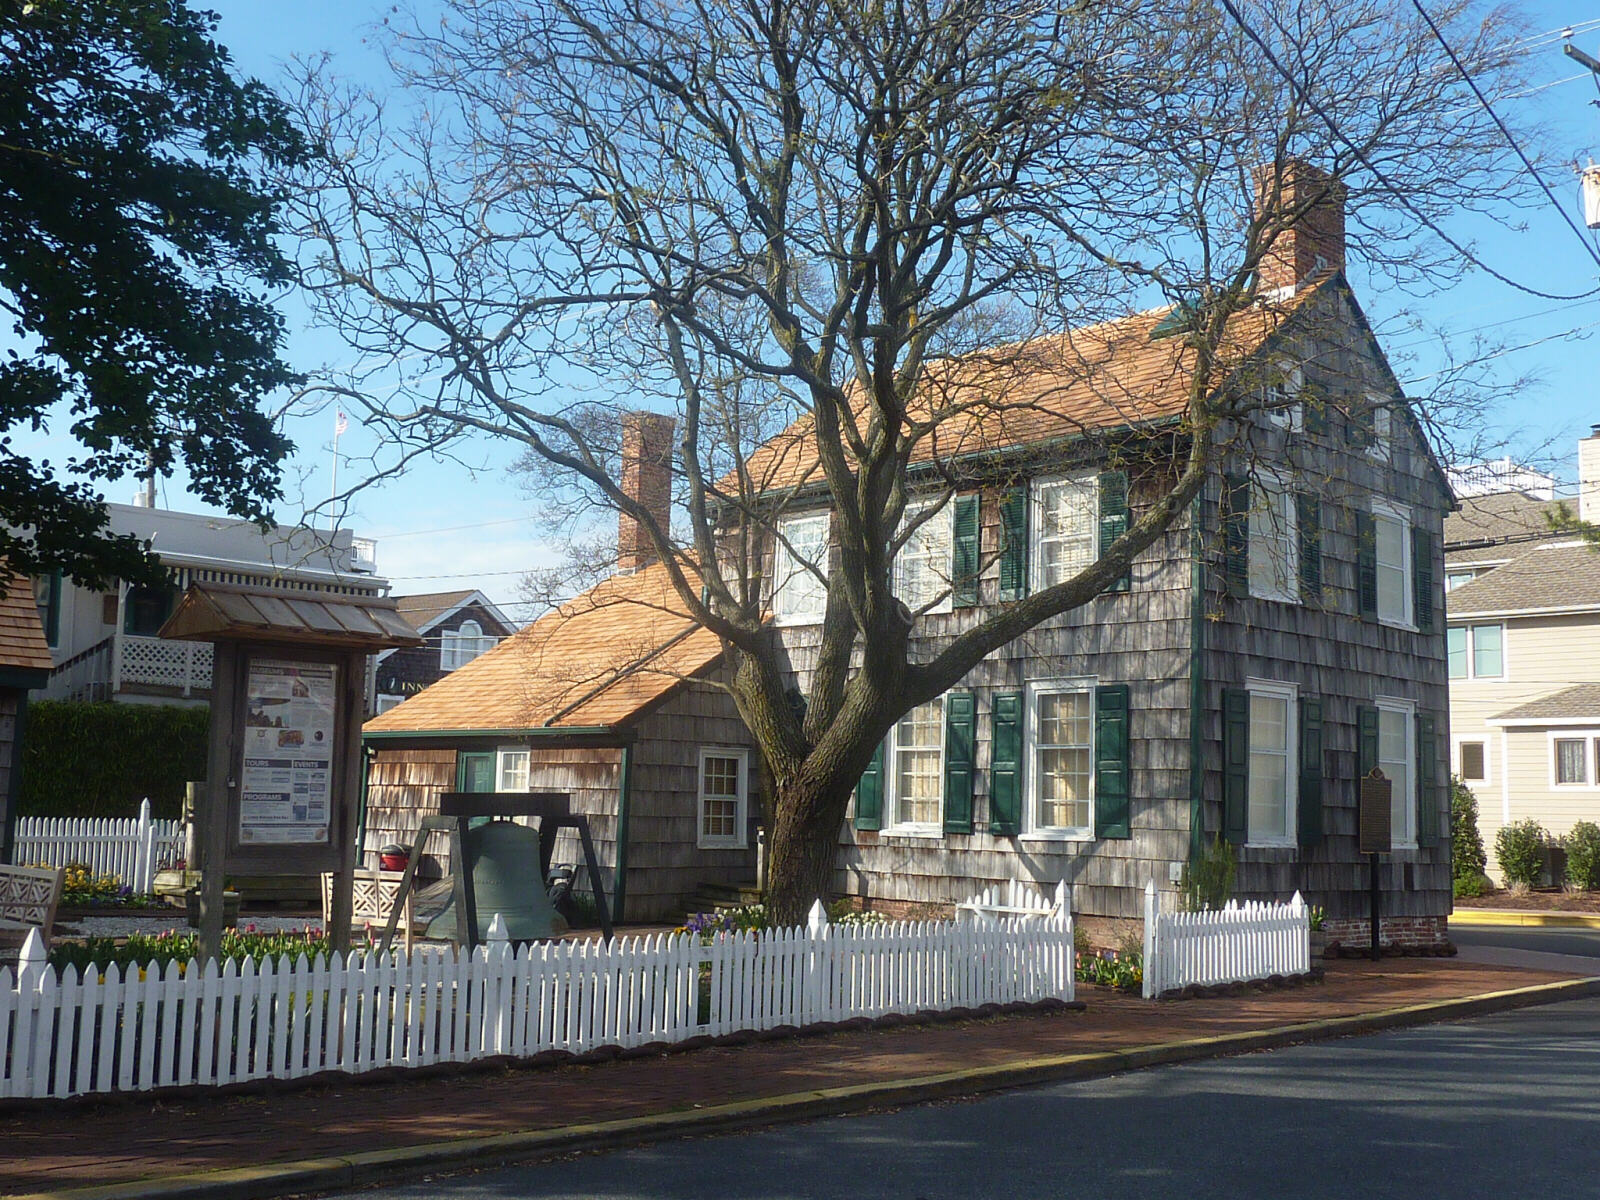 The museum in Lewes, Delaware